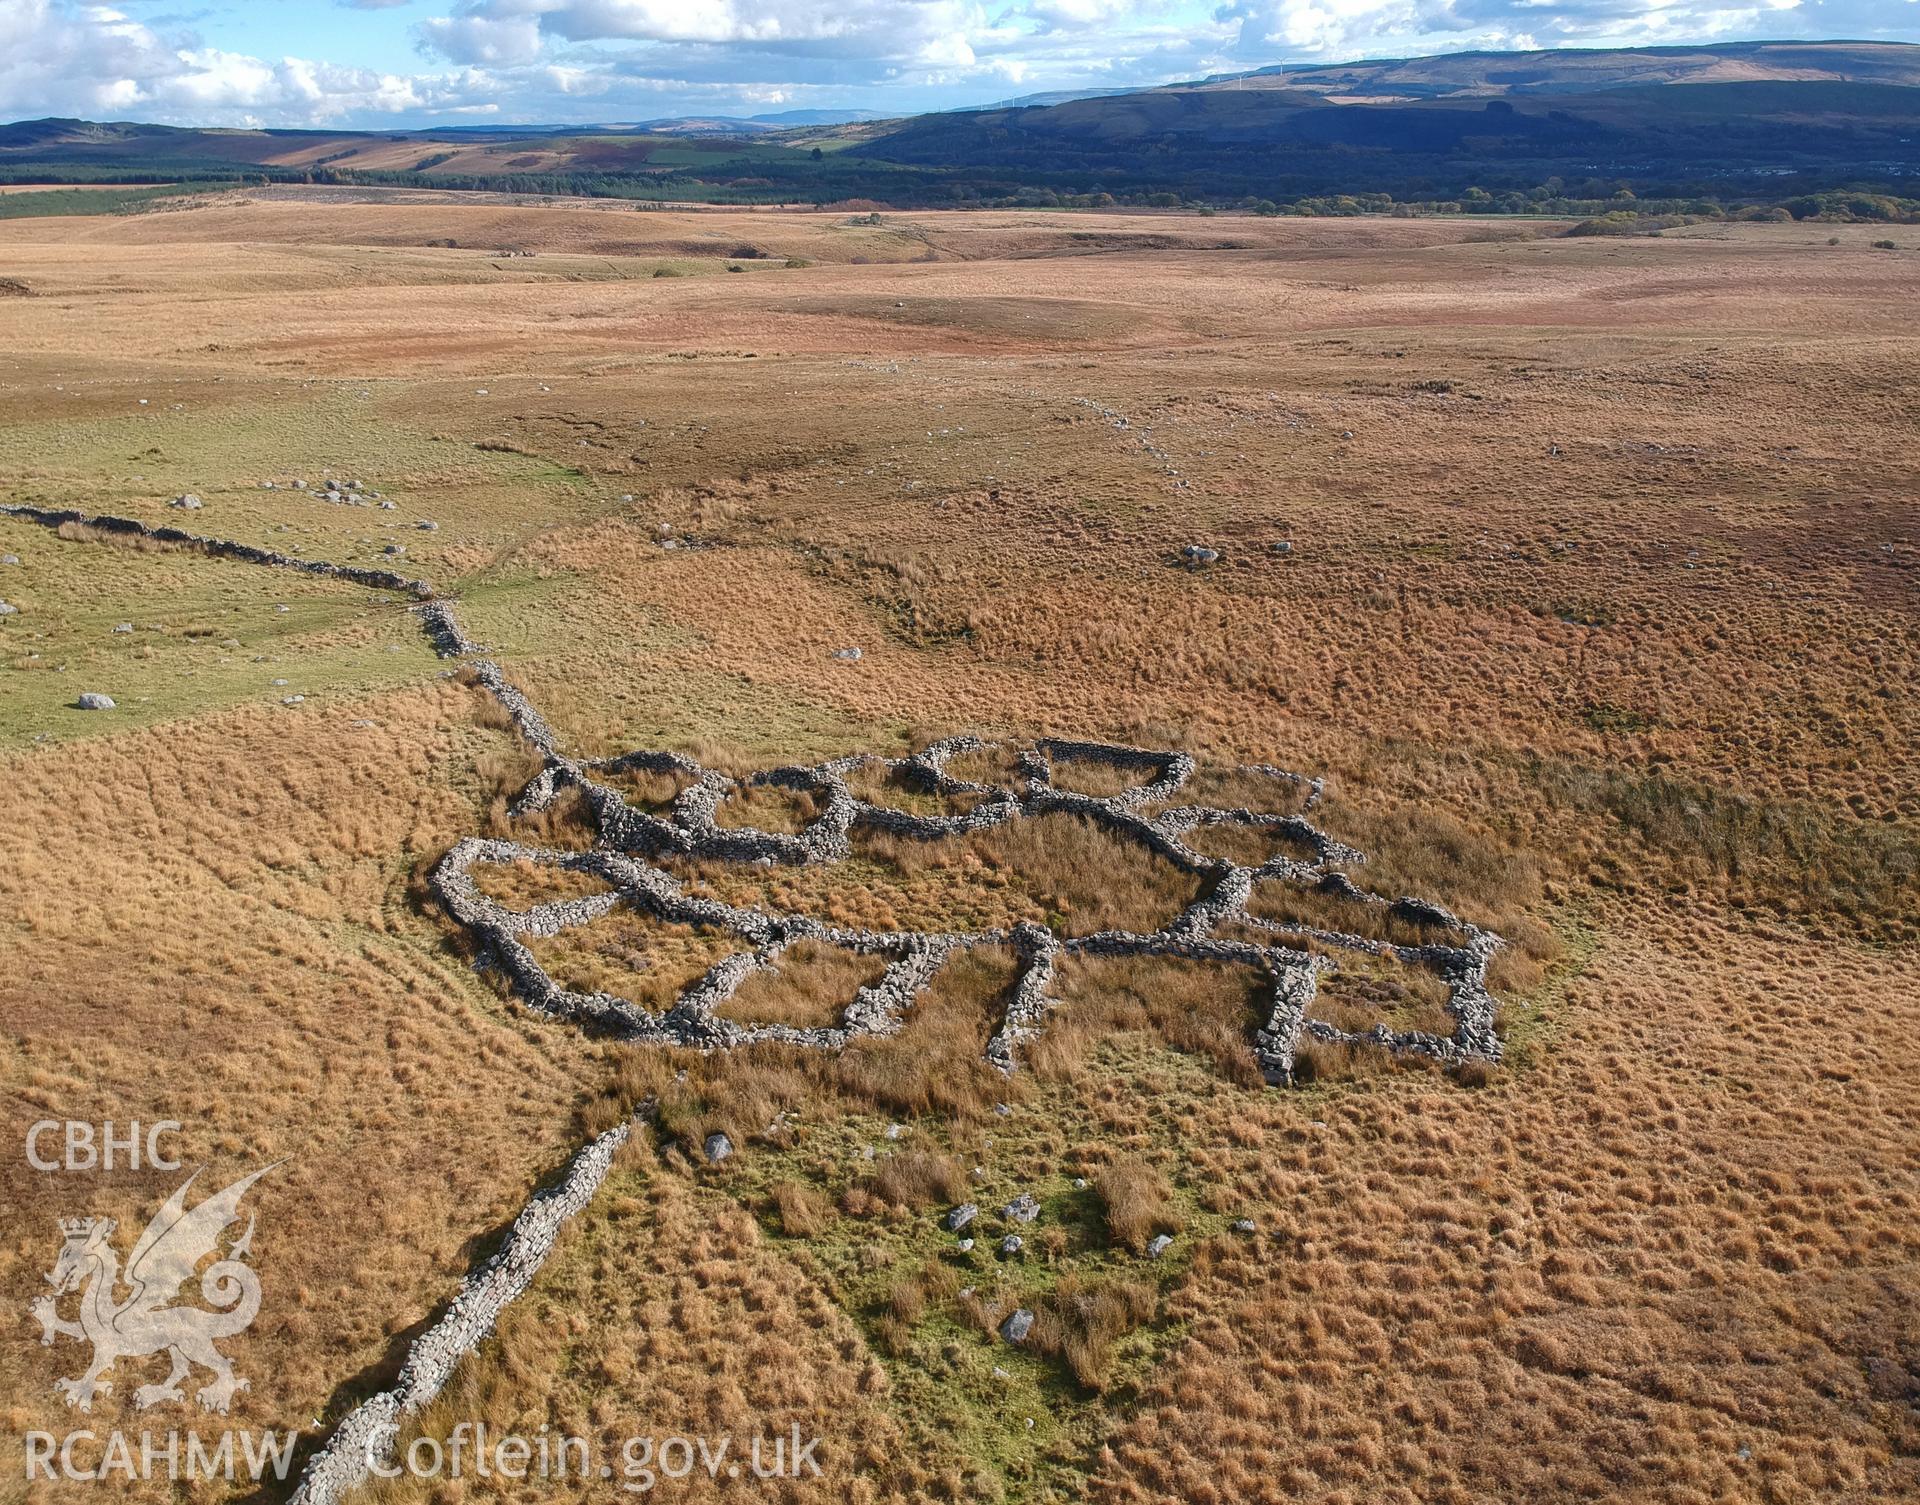 Aerial view of multi-cellular sheepfold south east of Dorwen, which is north of Ystradgynlais. Colour photograph taken by Paul R. Davis on 1st November 2018.